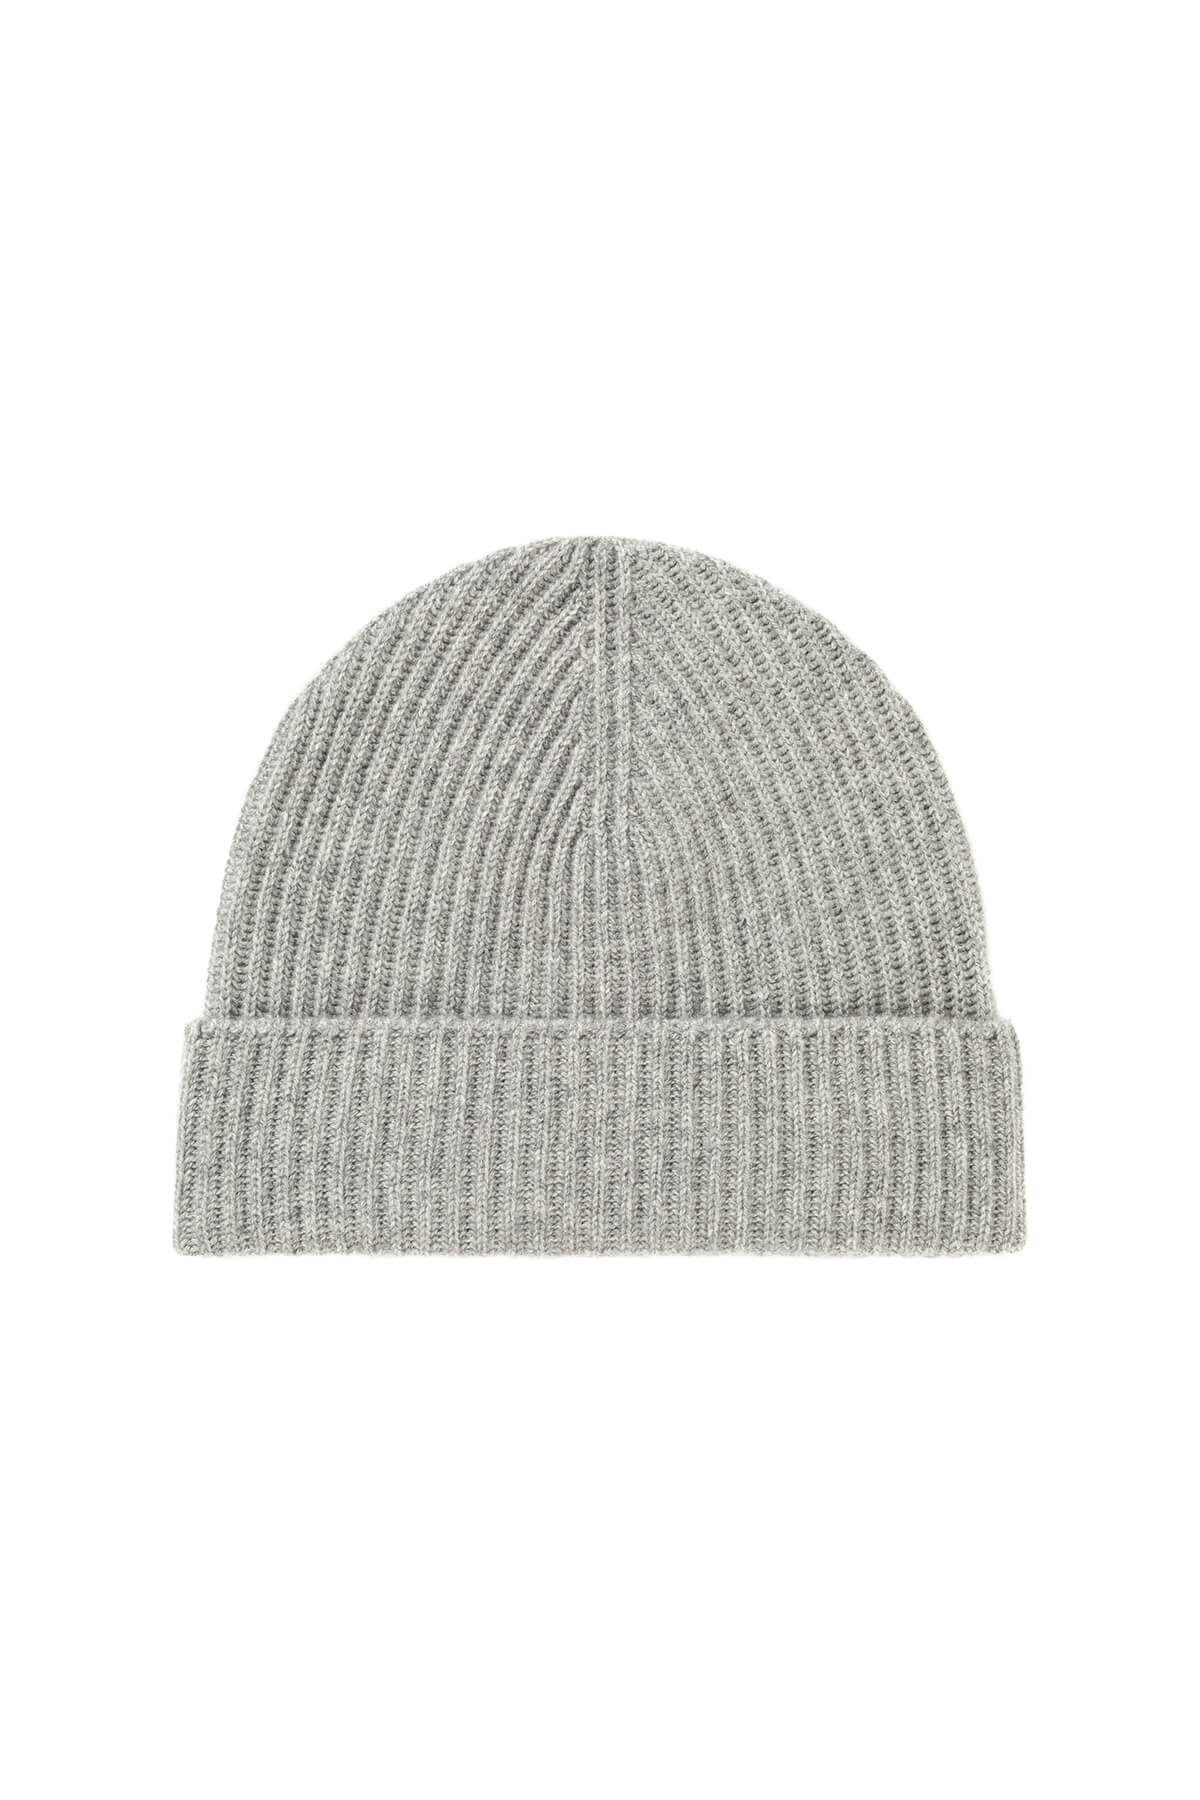 Johnstons of Elgin’s Ribbed Cashmere Beanie Giftset in Light Grey on a grey background AW23GIFTSET6C